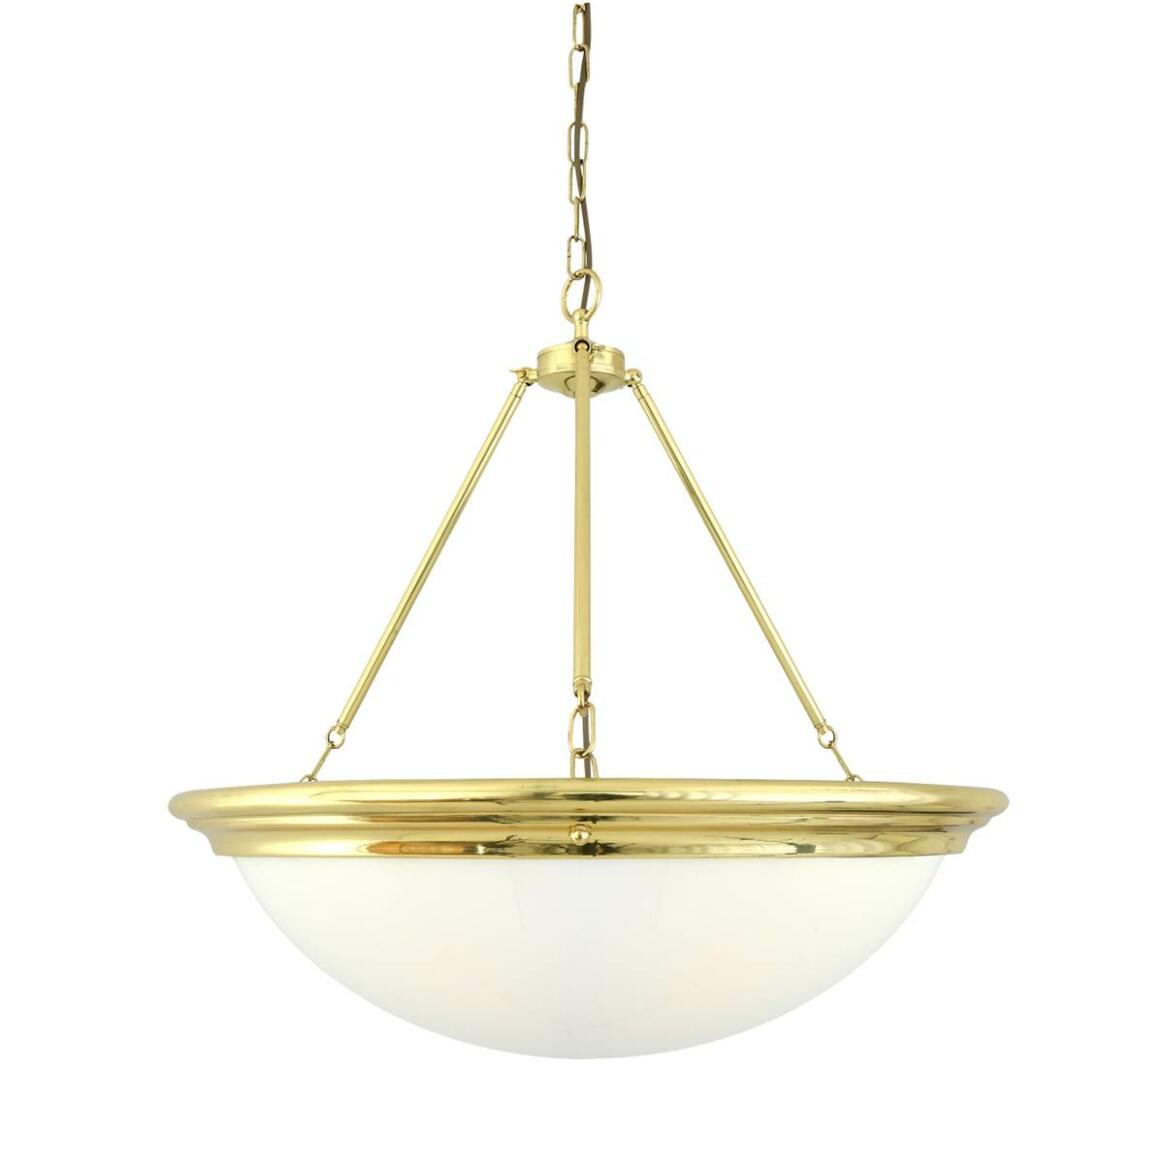 Athlone Traditional Brass and Acrylic Dome Chandelier main product image